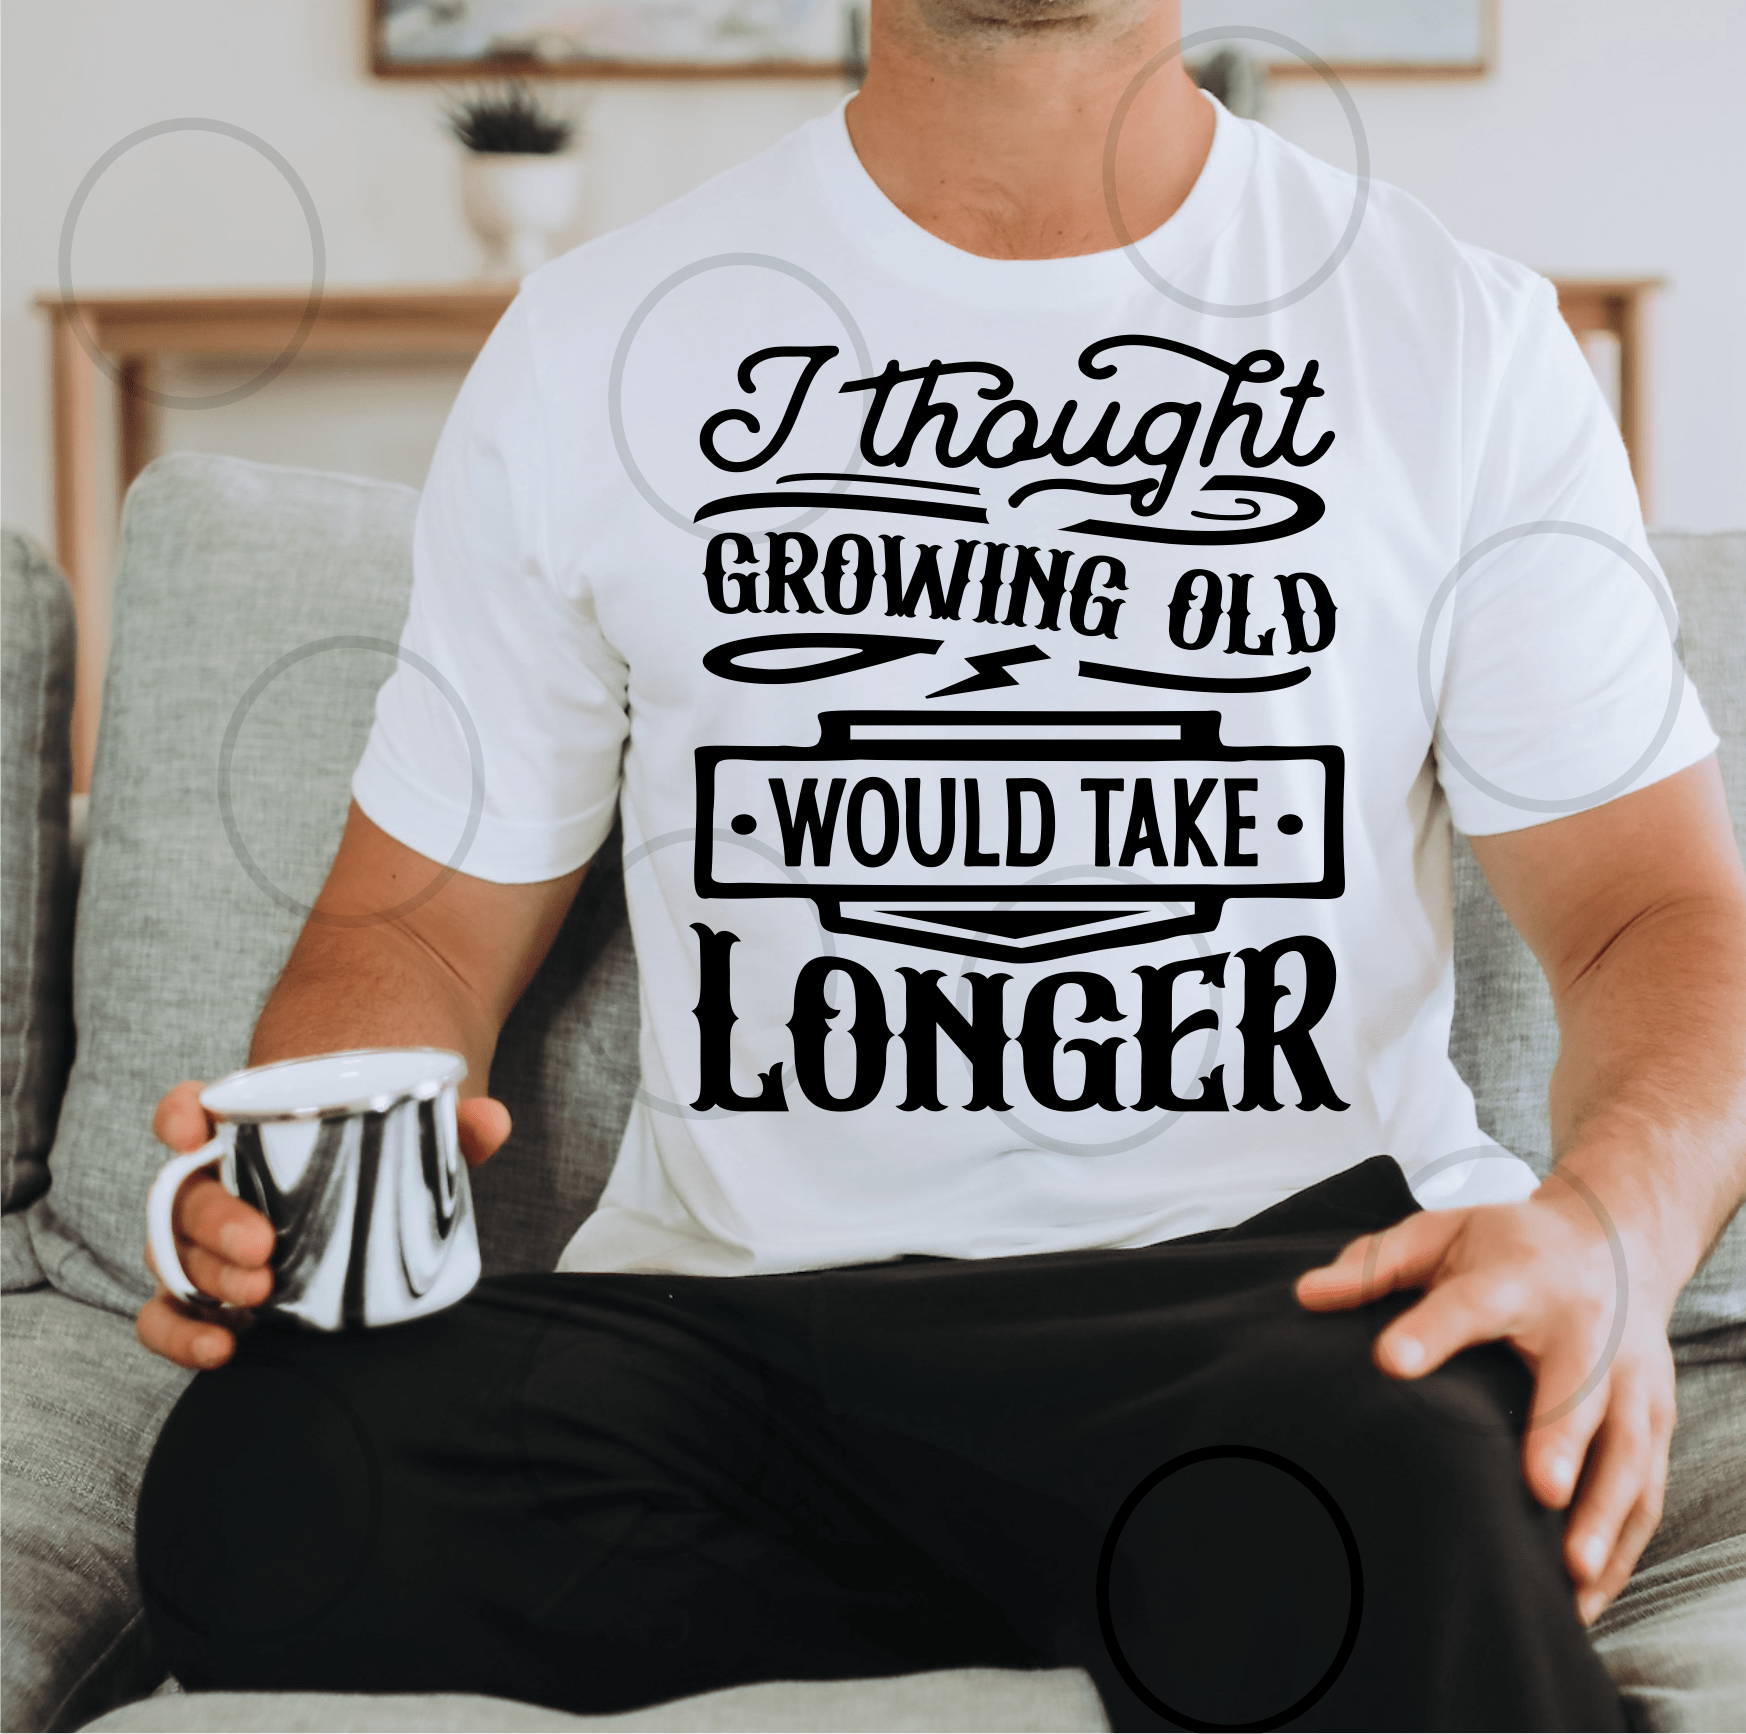 I thought growing old would take longer SINGLE COLOR BLACK size ADULT 10.1x11.9 DTF TRANSFERPRINT TO ORDER - Do it yourself Transfers